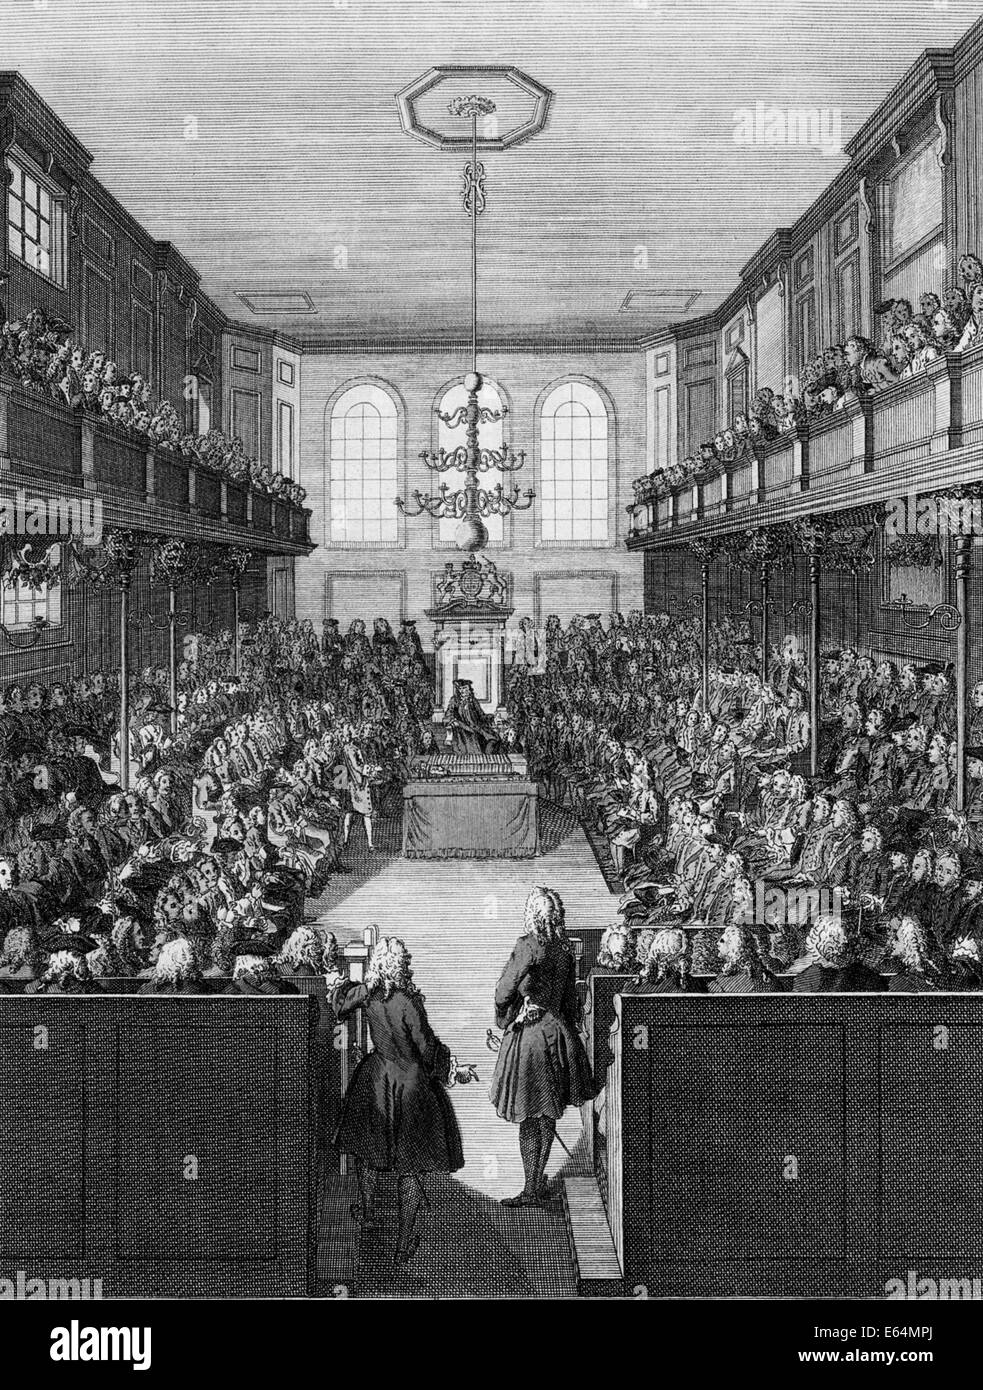 HOUSE OF COMMONS of the UK Parliament about 1770 from a contemporary engraving by B. Cole Stock Photo